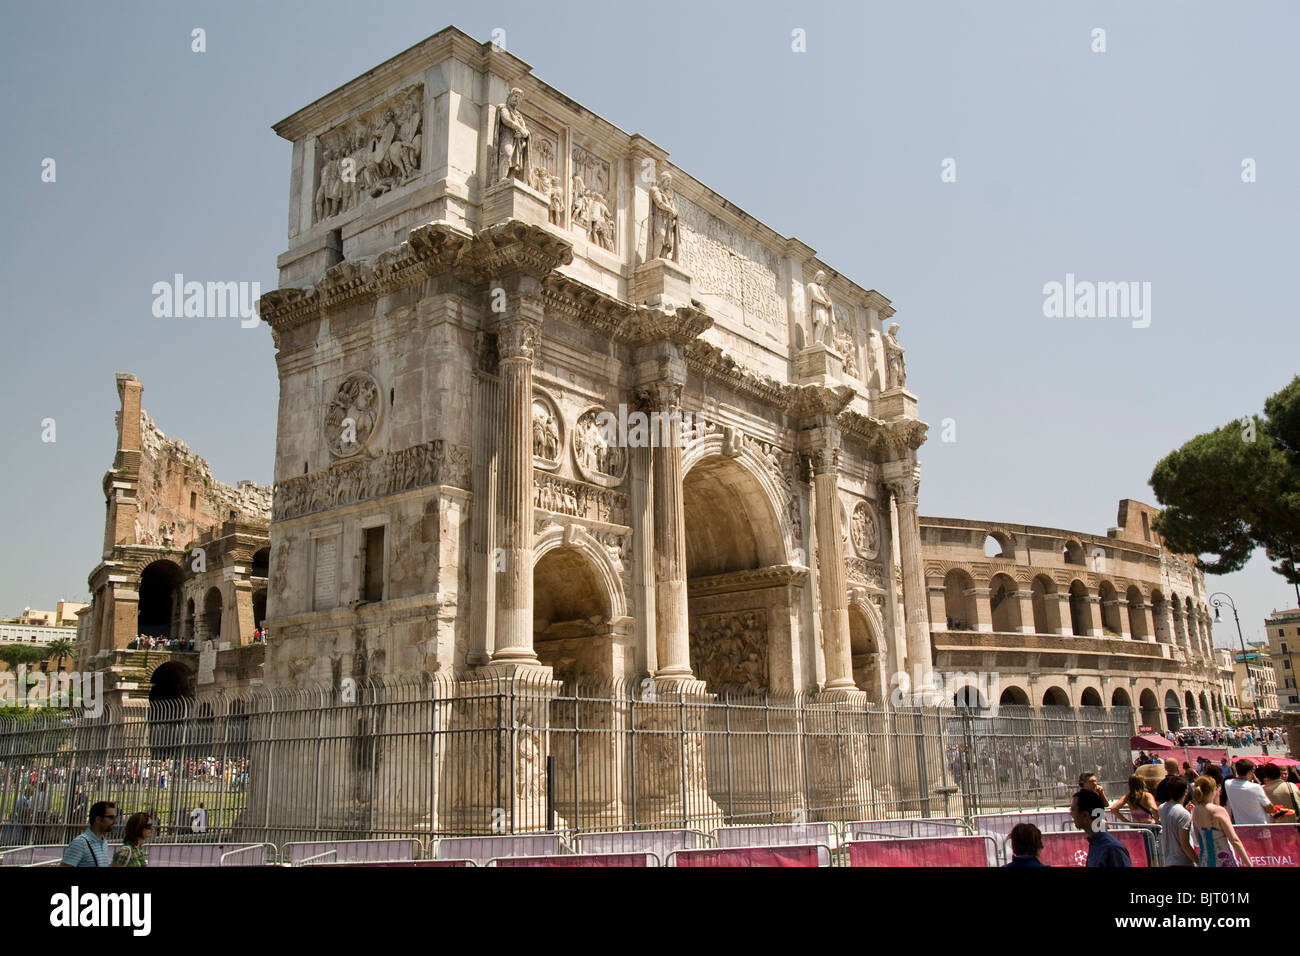 Italy, Rome, Arco di Costantino The Colosseum in the background Stock Photo